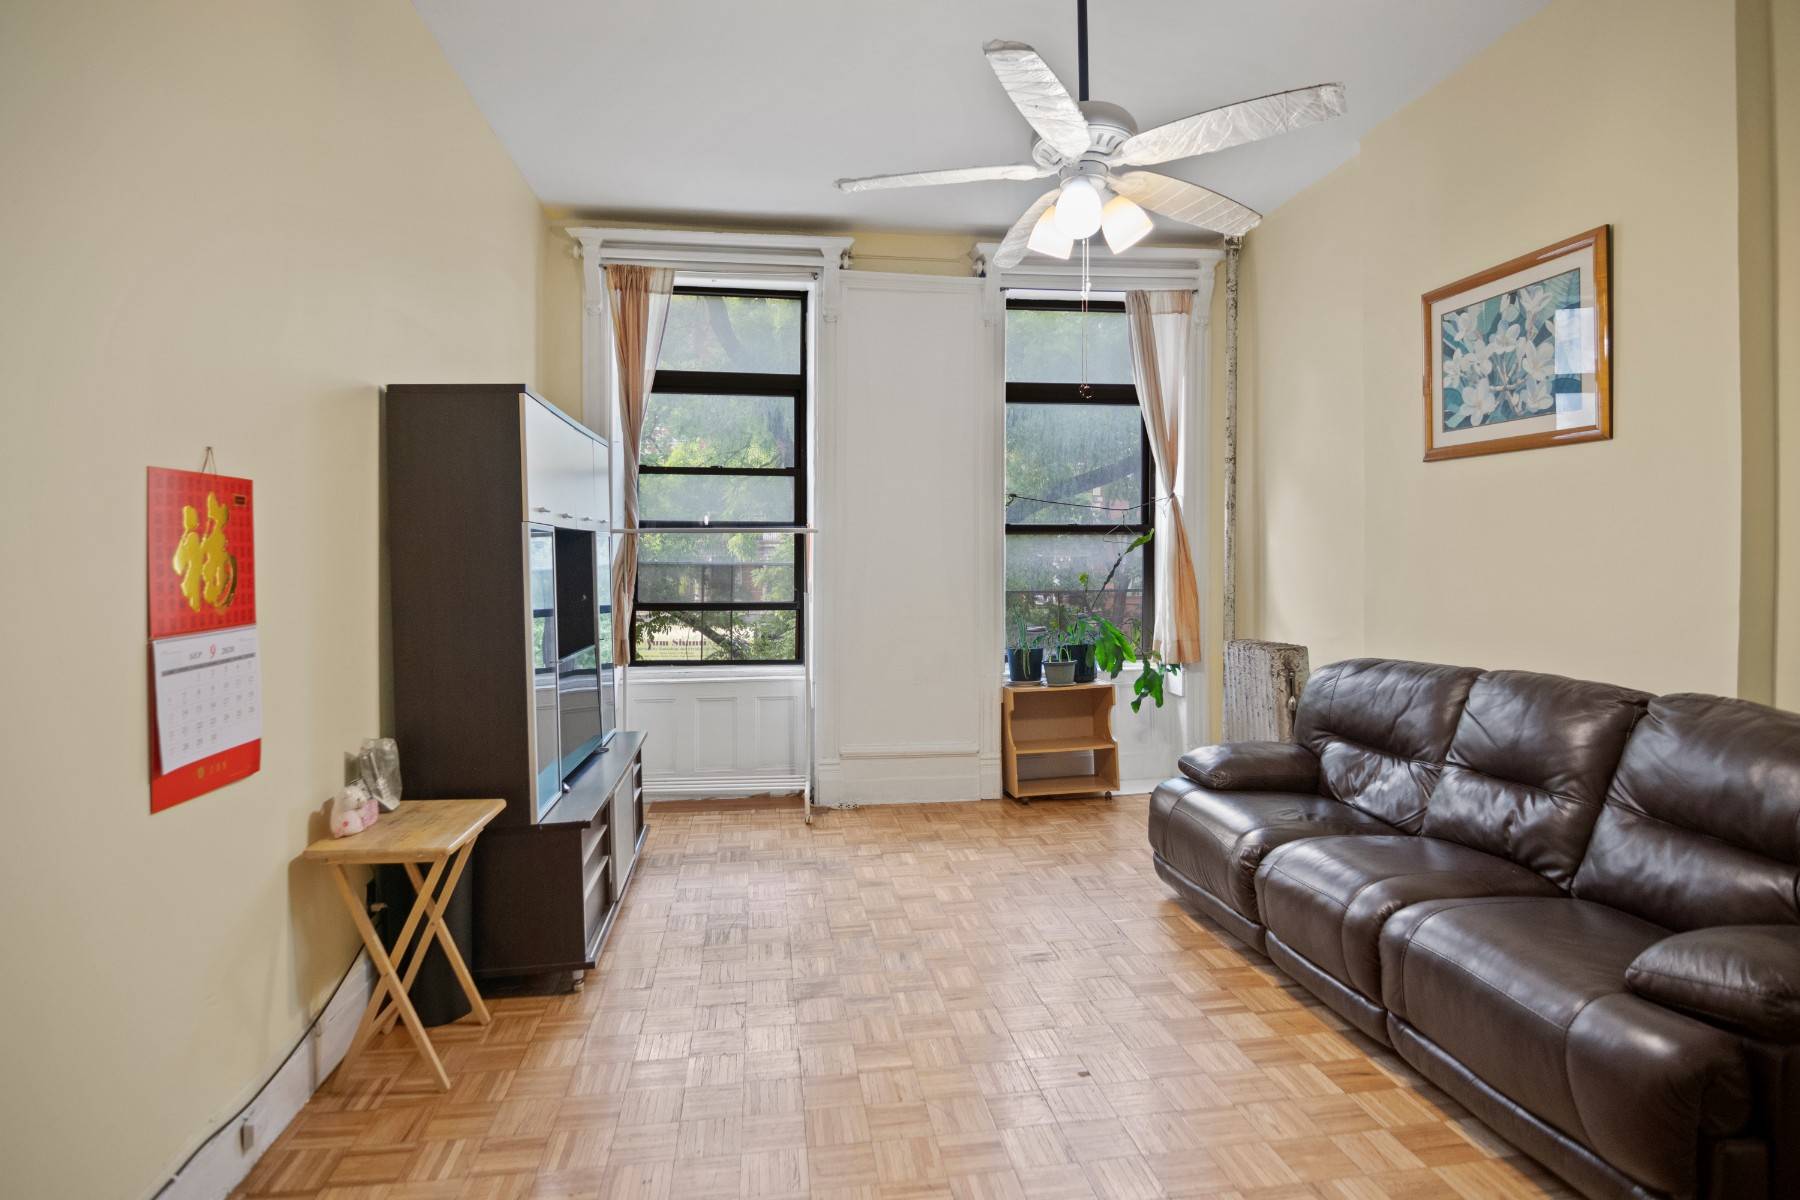 Rare opportunity to own a spacious, 1000 SqFt, 4 bedroom floor through loft on the border of the East Village and Gramercy Park.